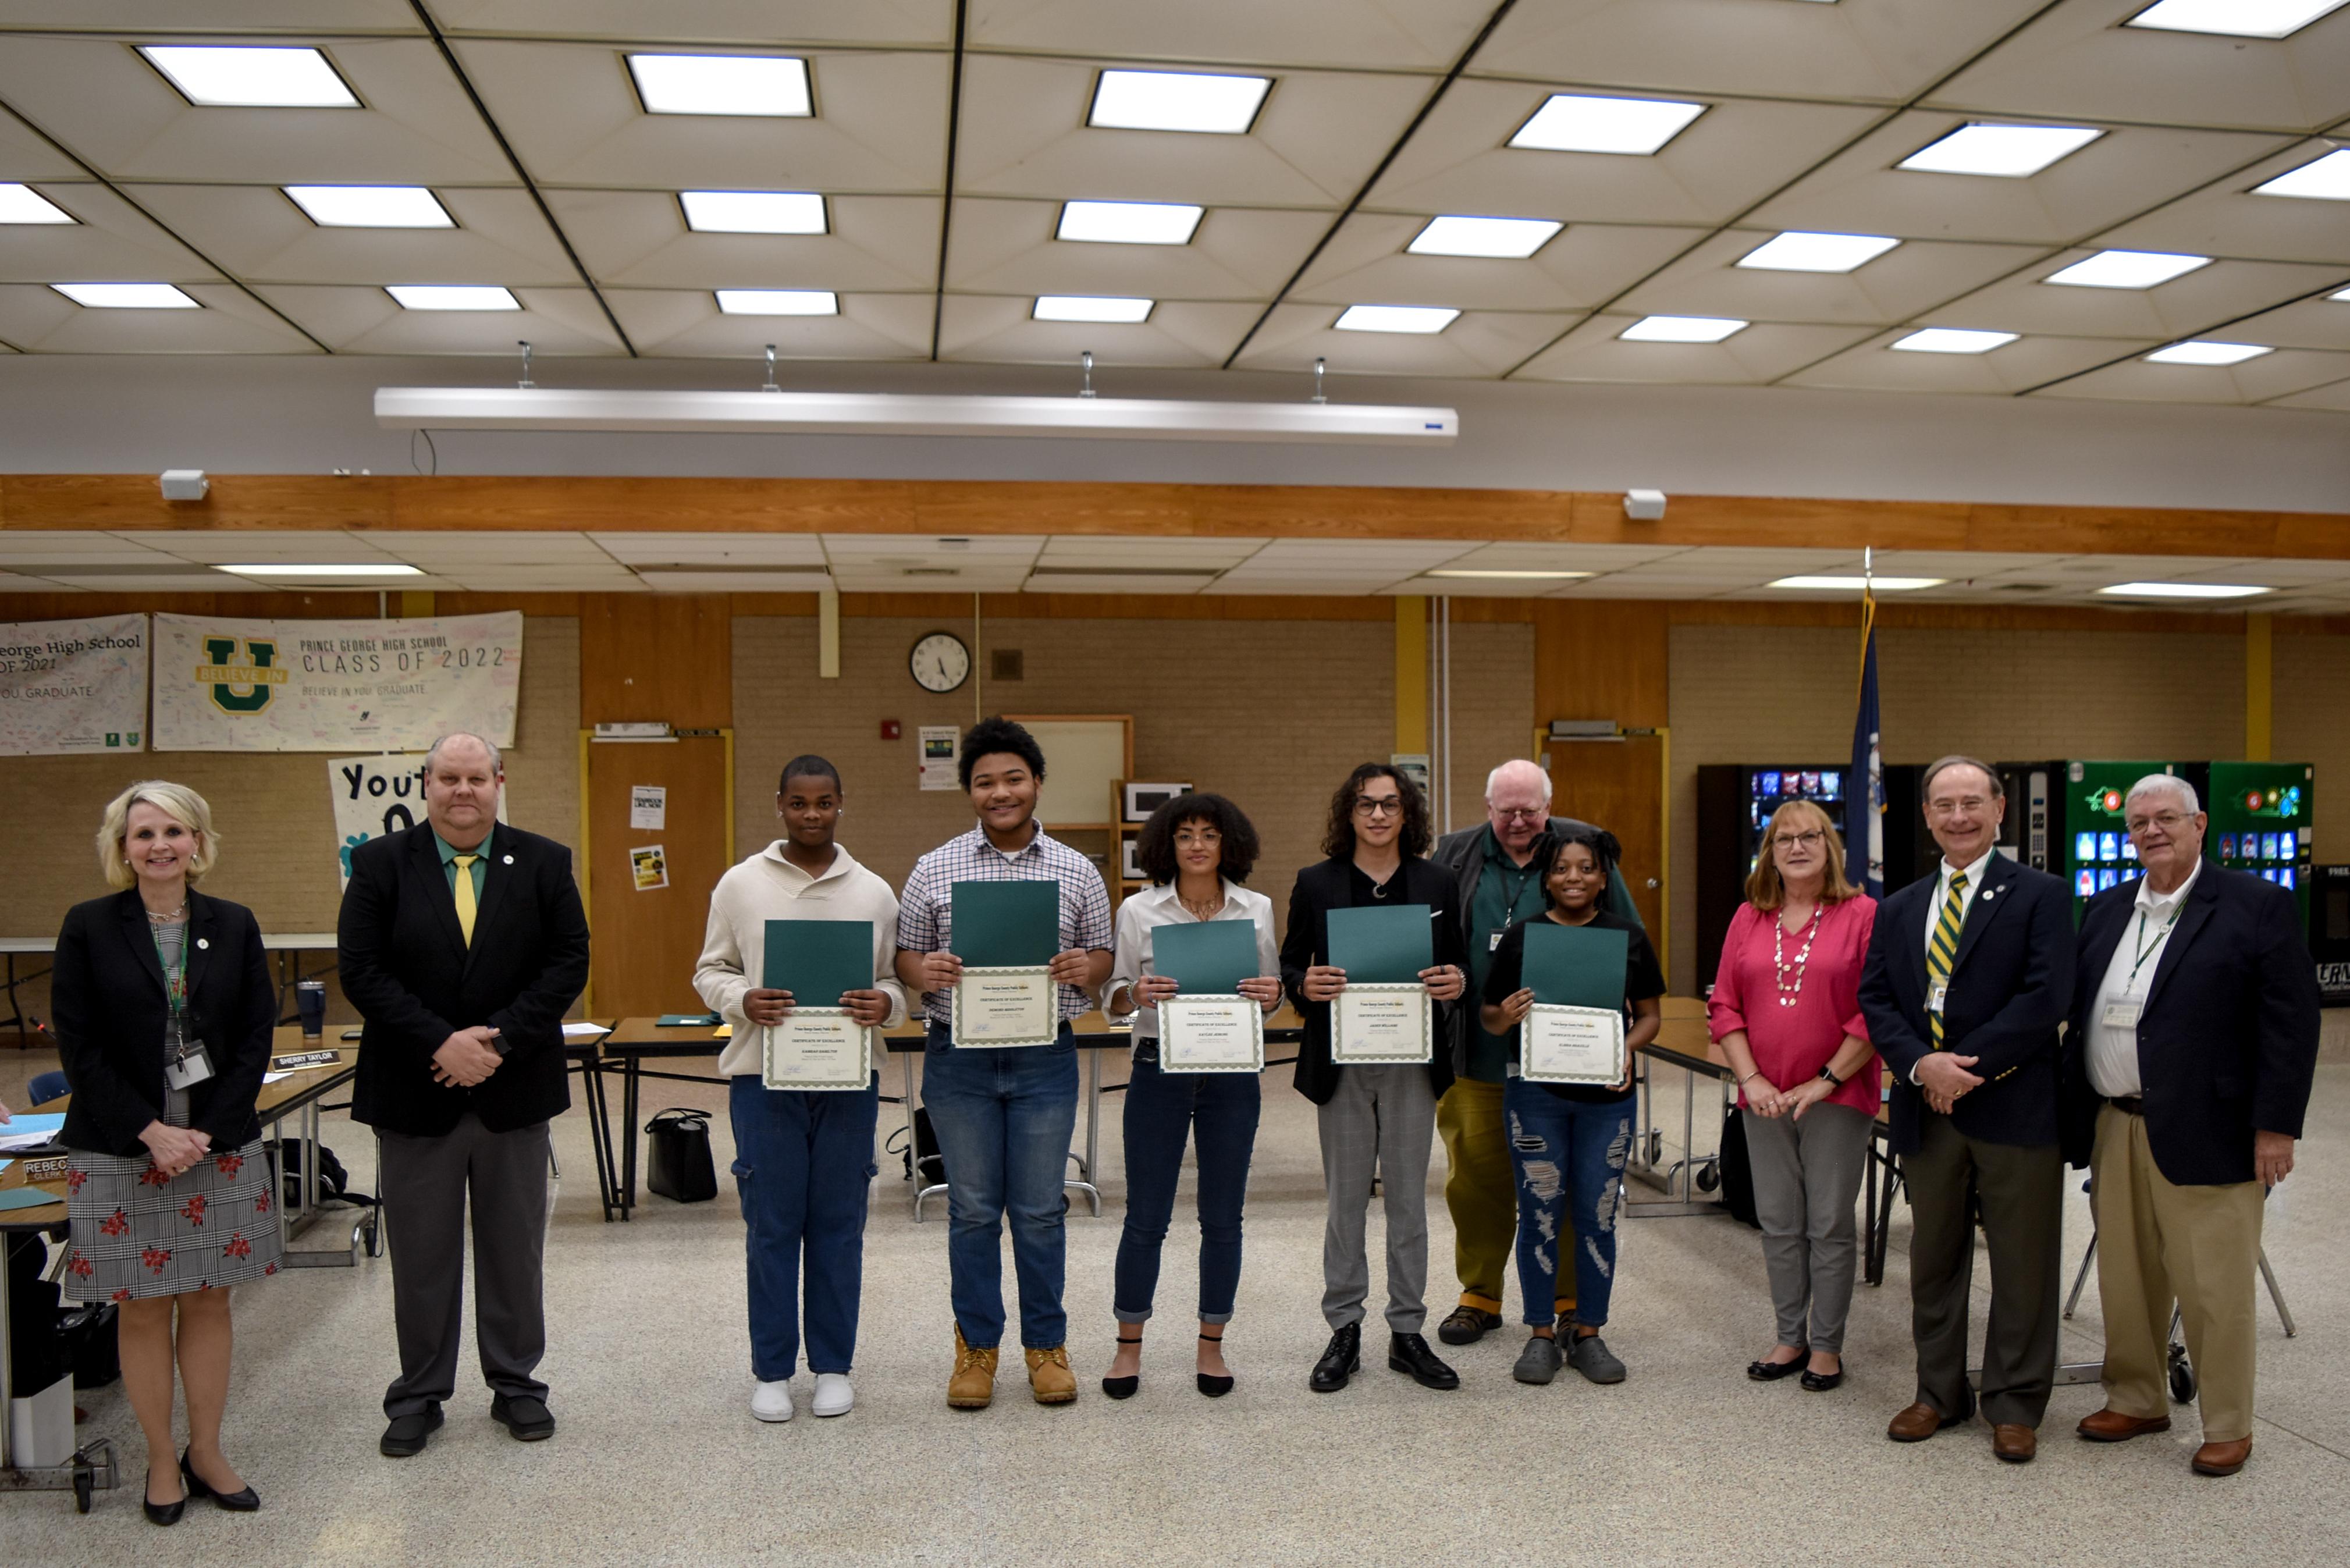 Scenes from the March 2022 School Board Recognitions Program